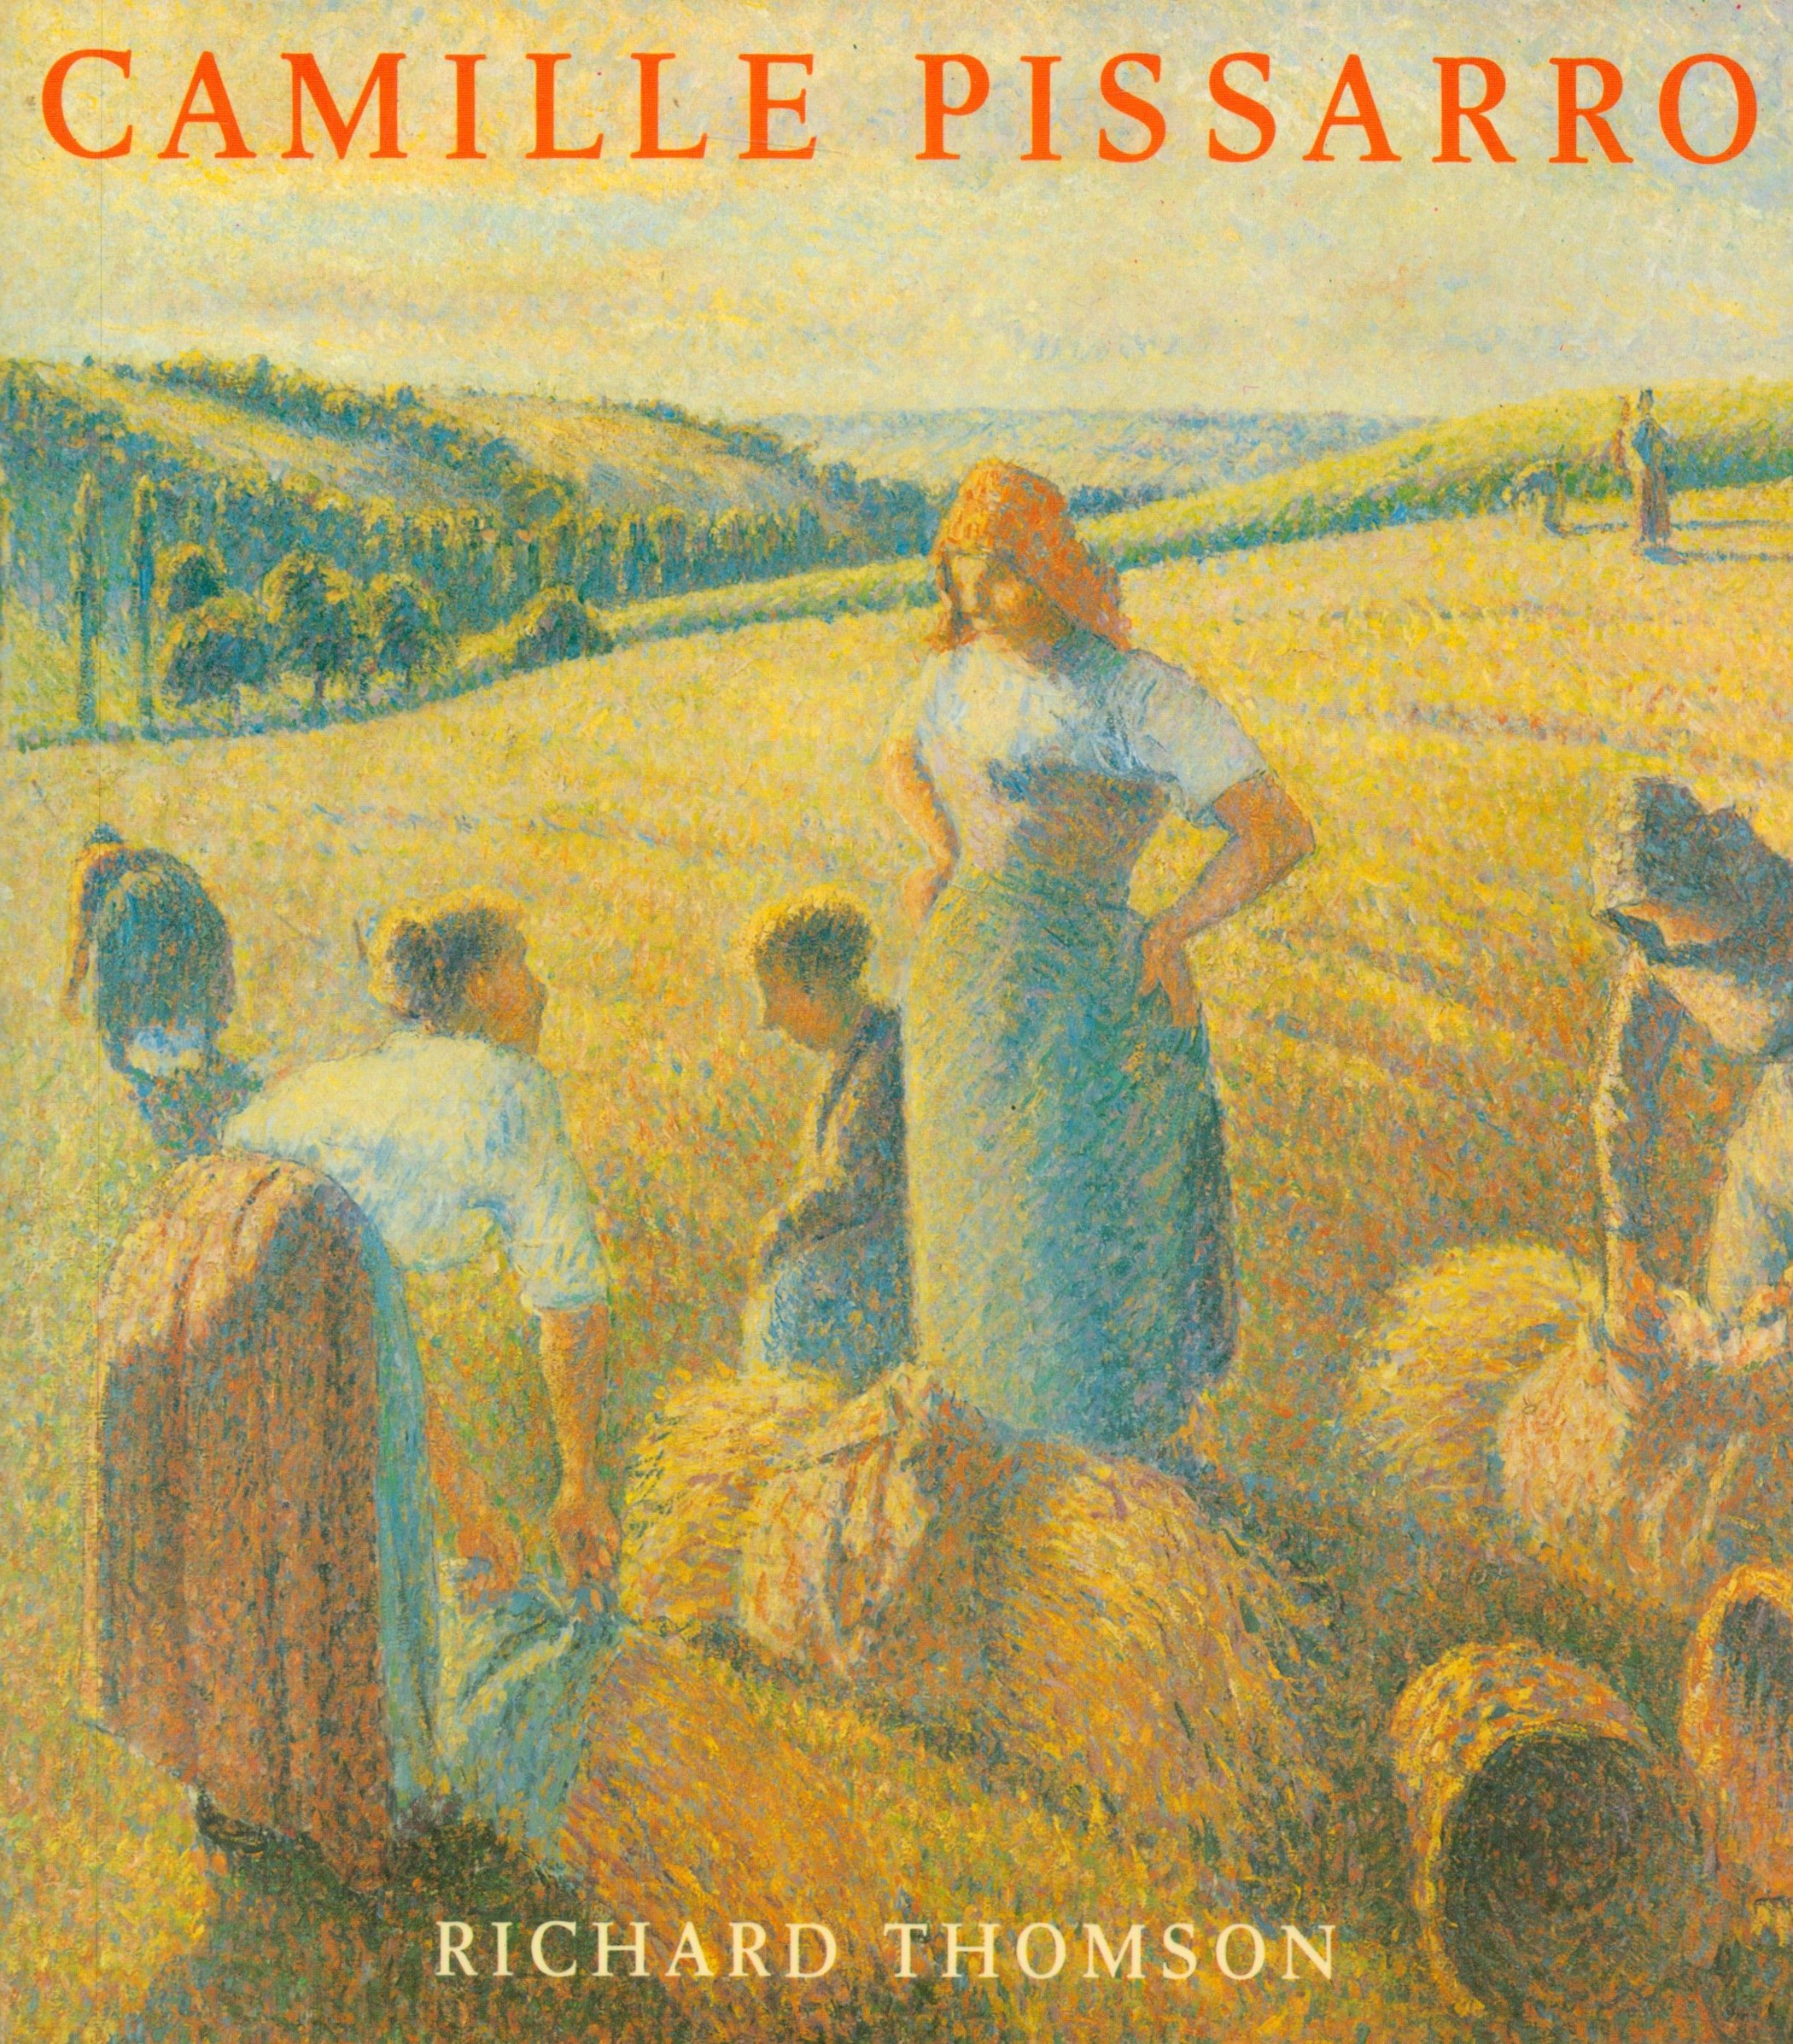 Camille Pissarro by Richard Thomson 1990 First Edition Softback Book with 127 pages published by The